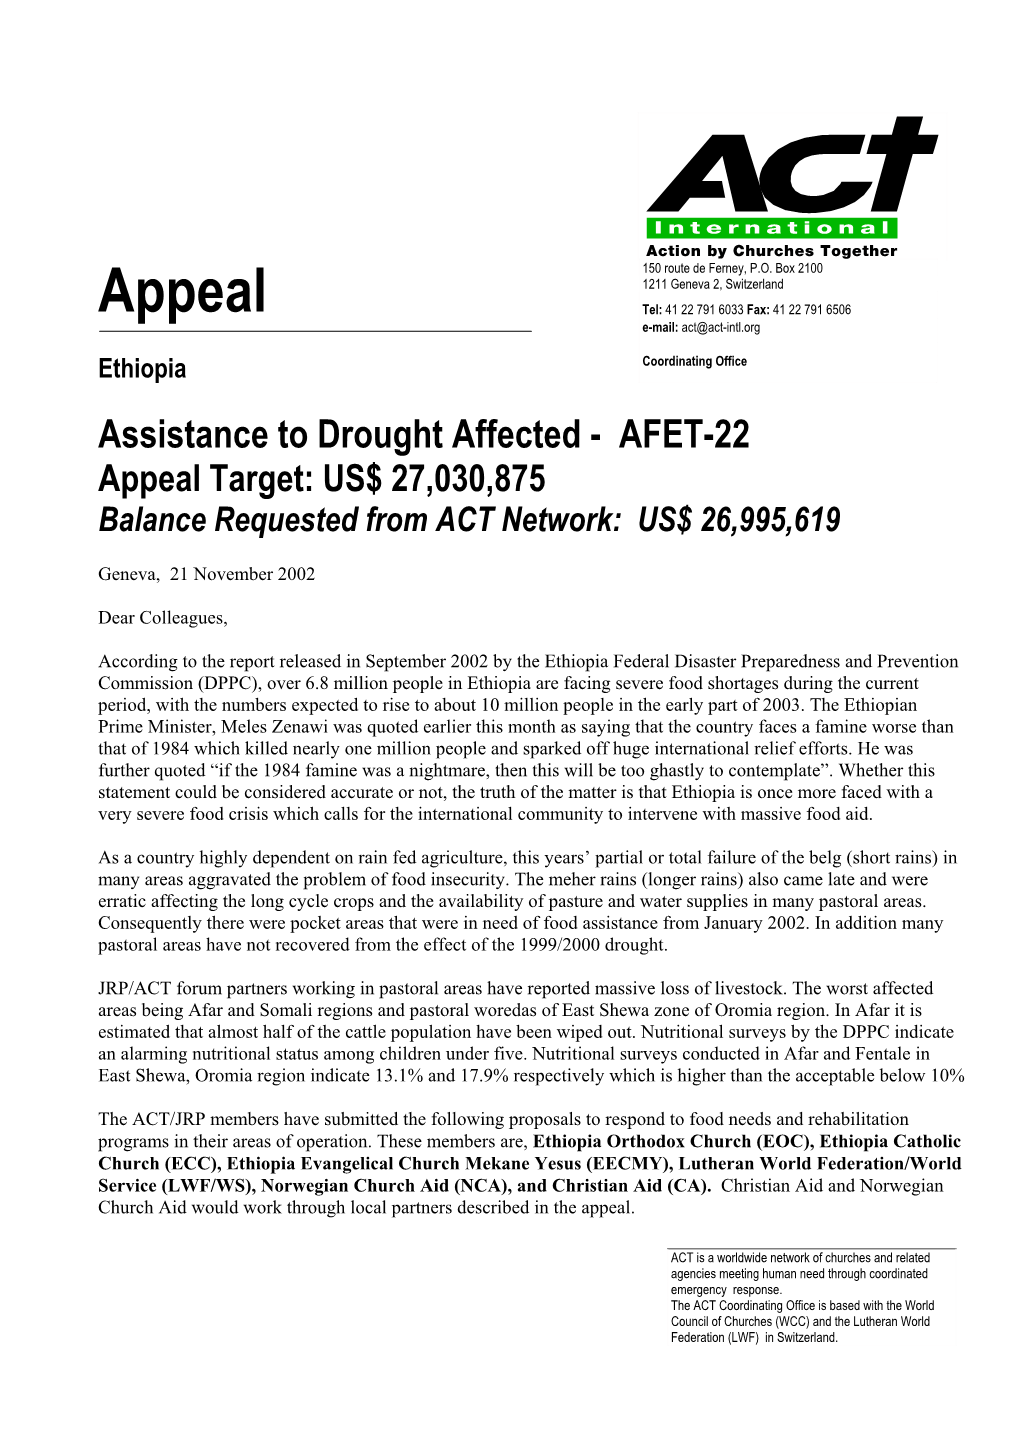 AFET-22 Appeal Target: US$ 27,030,875 Balance Requested from ACT Network: US$ 26,995,619